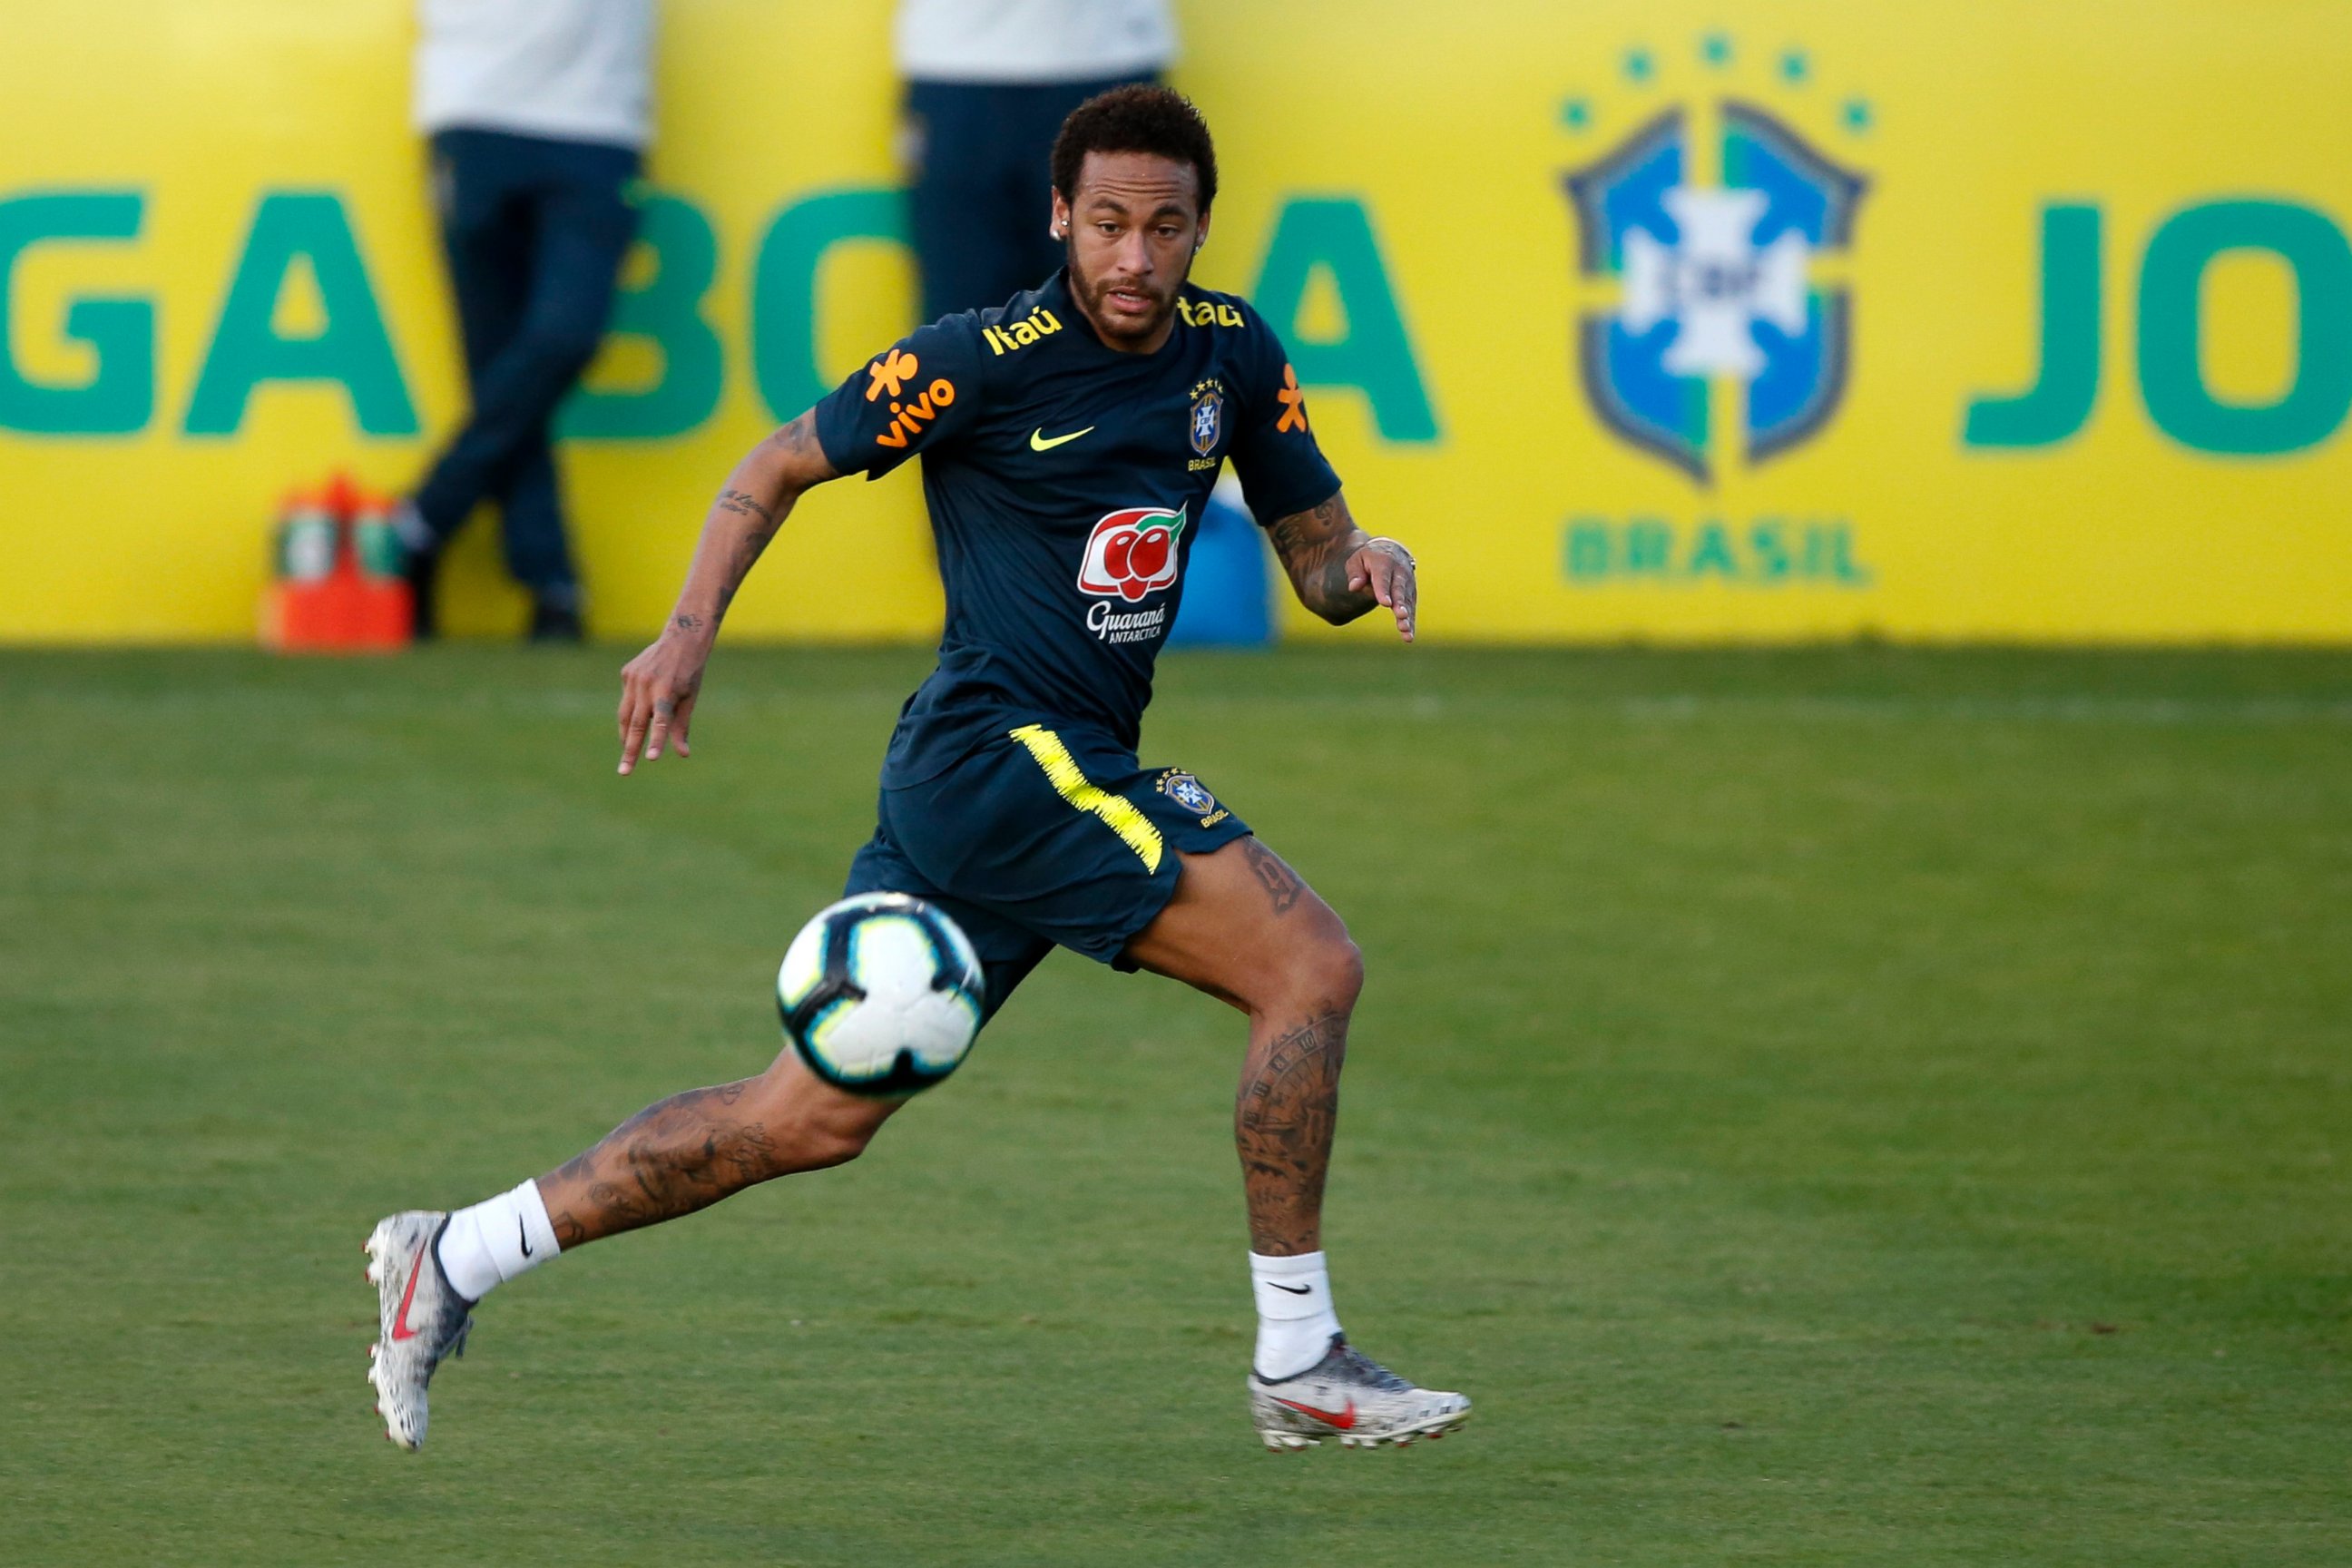 PHOTO: Brazil's soccer player Neymar runs for the ball during a practice session at the Granja Comary training center ahead of the Copa America tournament, in Teresopolis, Brazil, Tuesday, May 28, 2019.